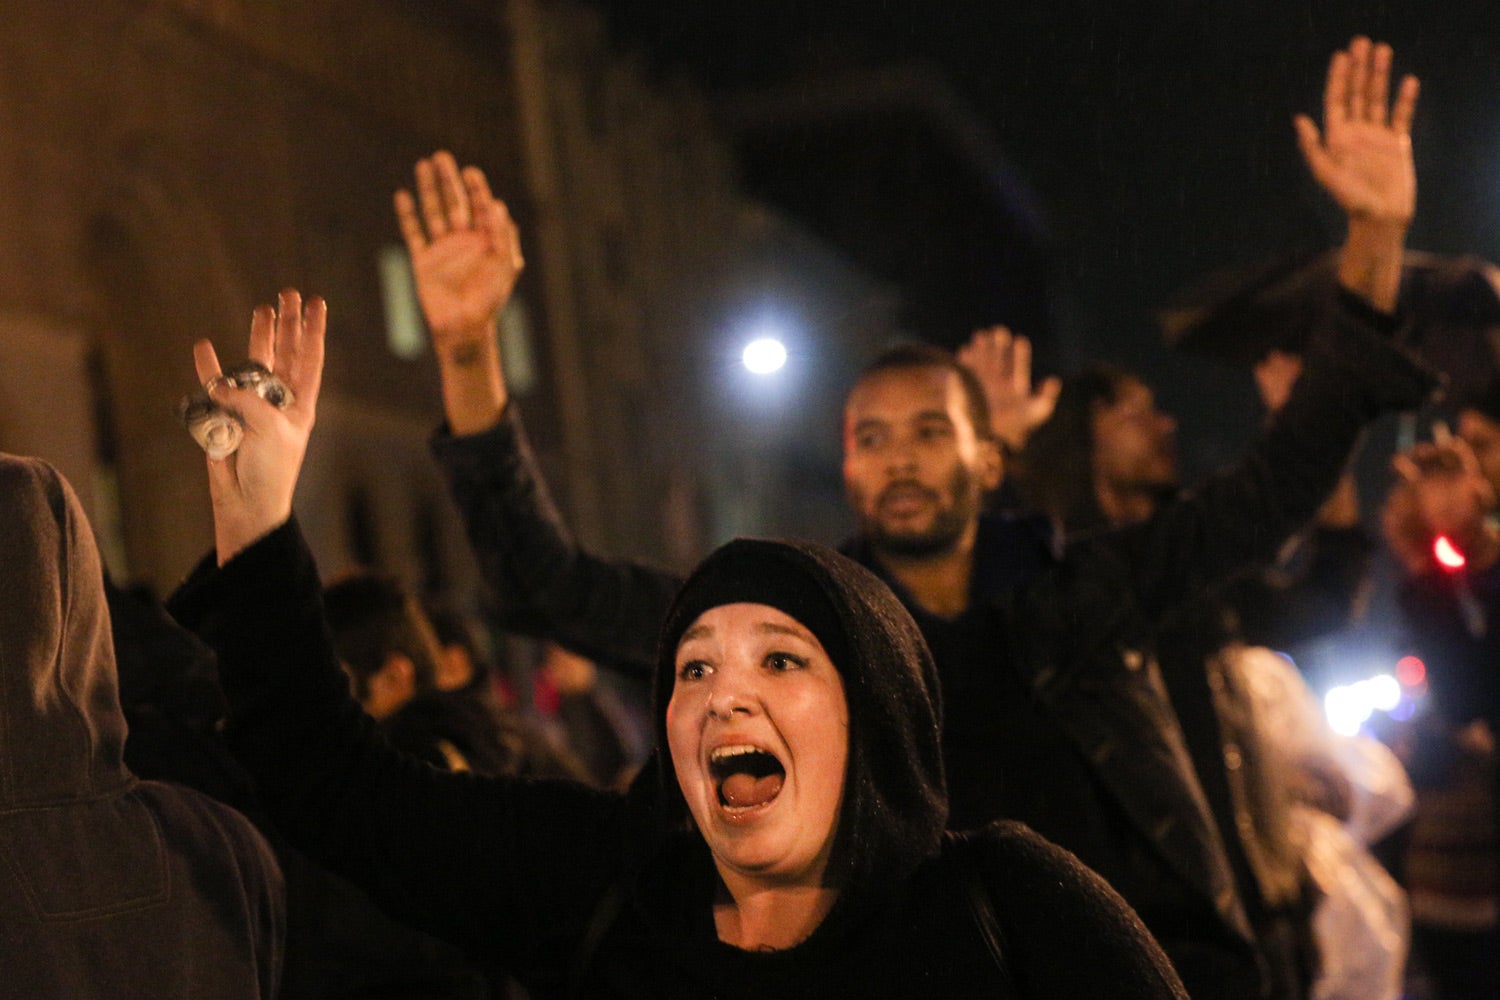 How Have Your Non-Black Friends Responded to Recent Protests?